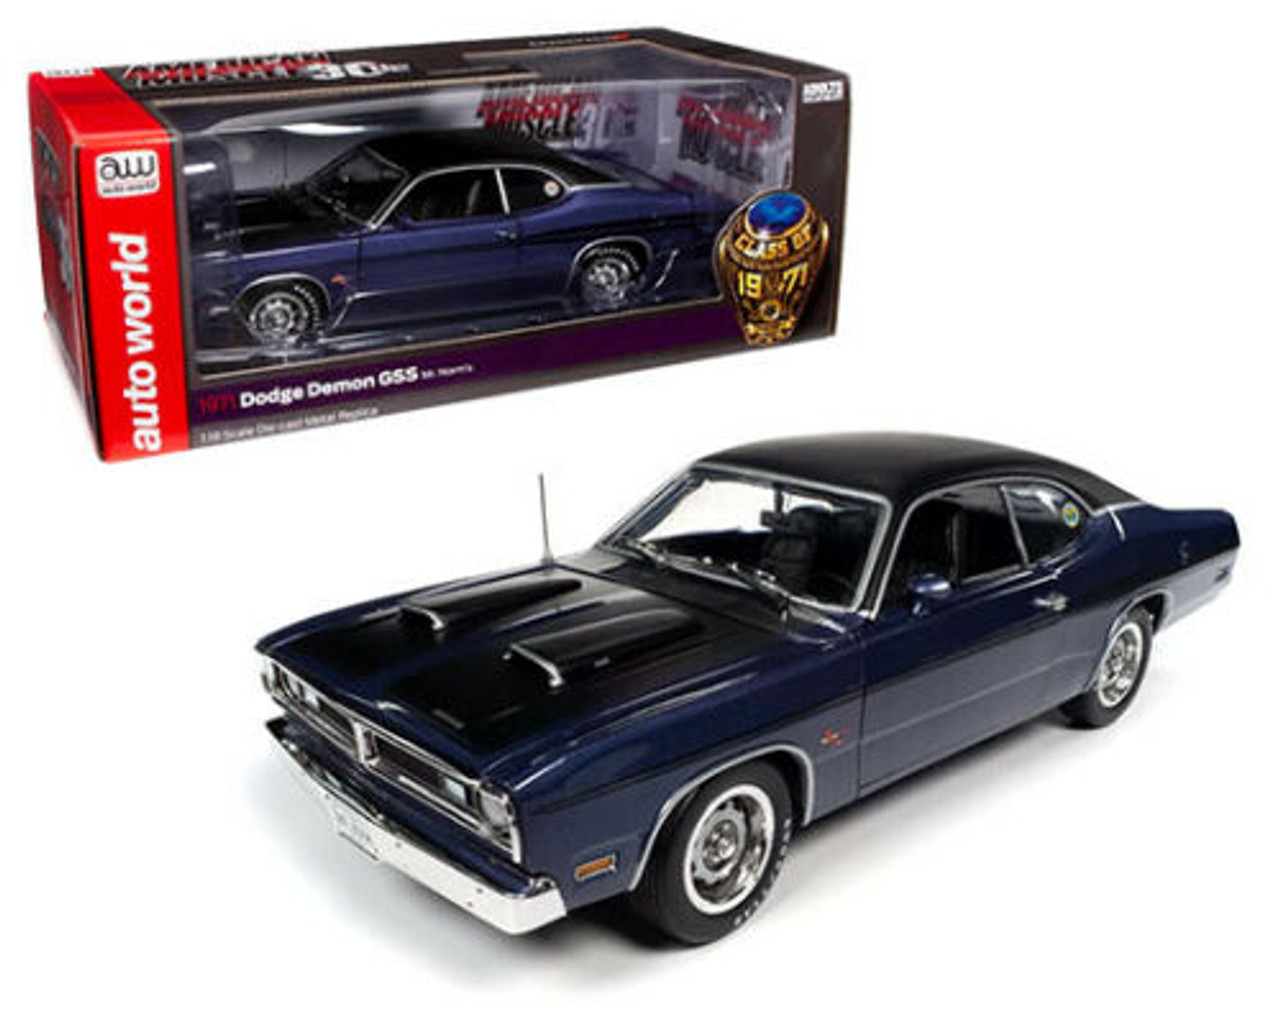 1/18 Auto World 1971 Dodge Demon GSS Mr. Norm's (Purple with Matte Black Hood & Roof) - American Muscle 30th Anniversary Diecast Car Model